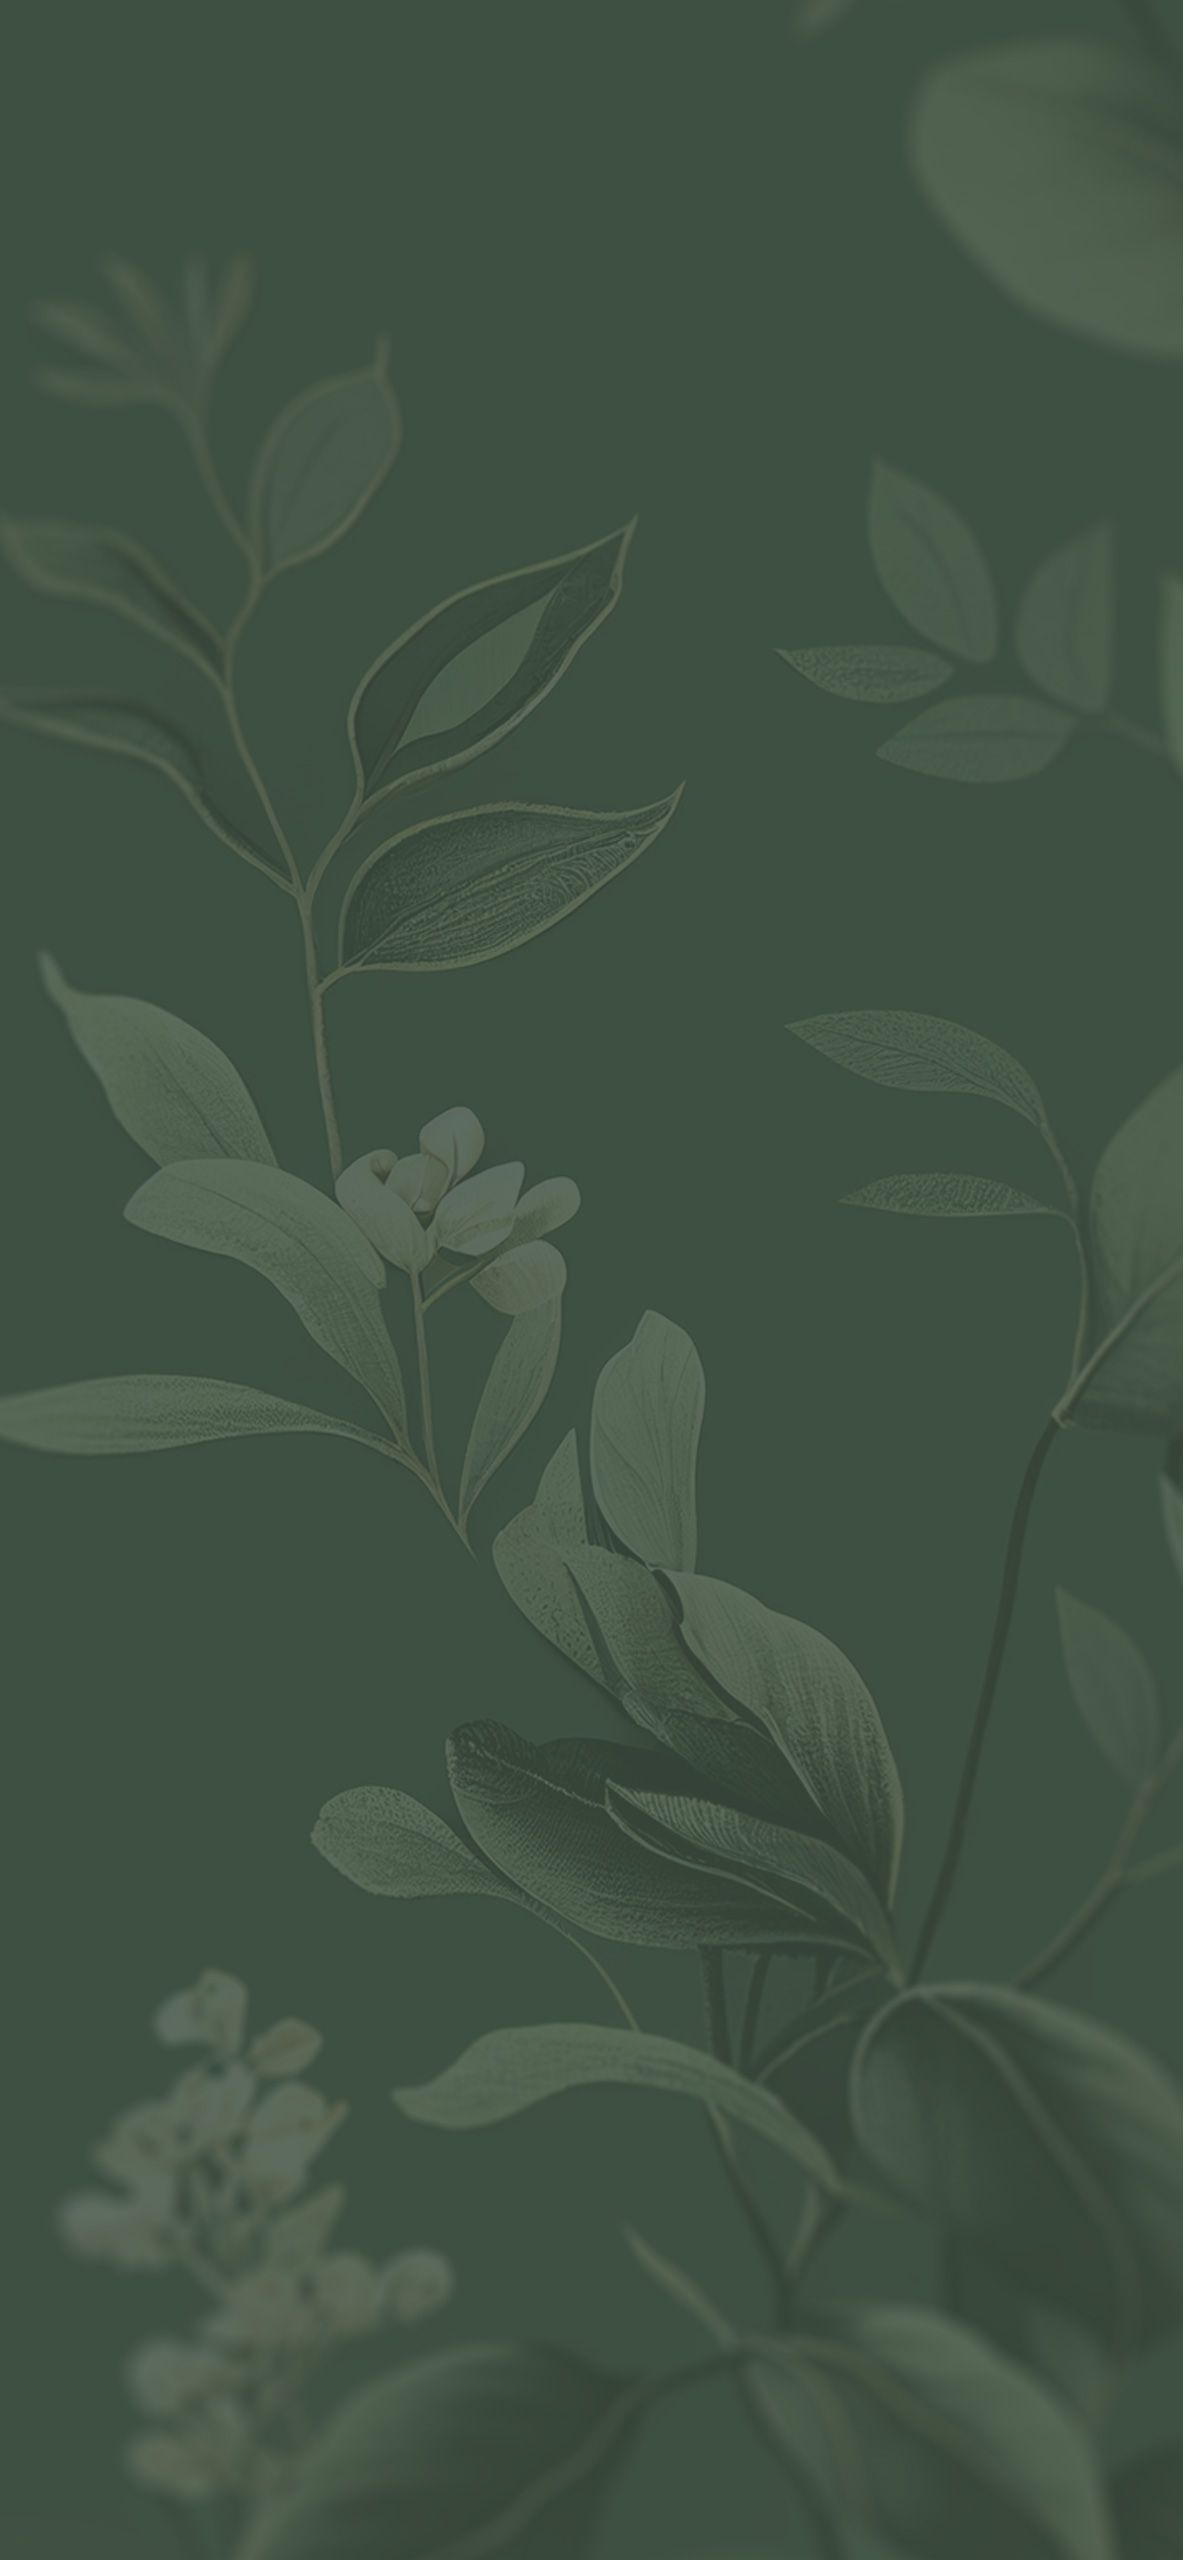 IPhone wallpaper with a dark green background and a light green floral design - Sage green, dark green